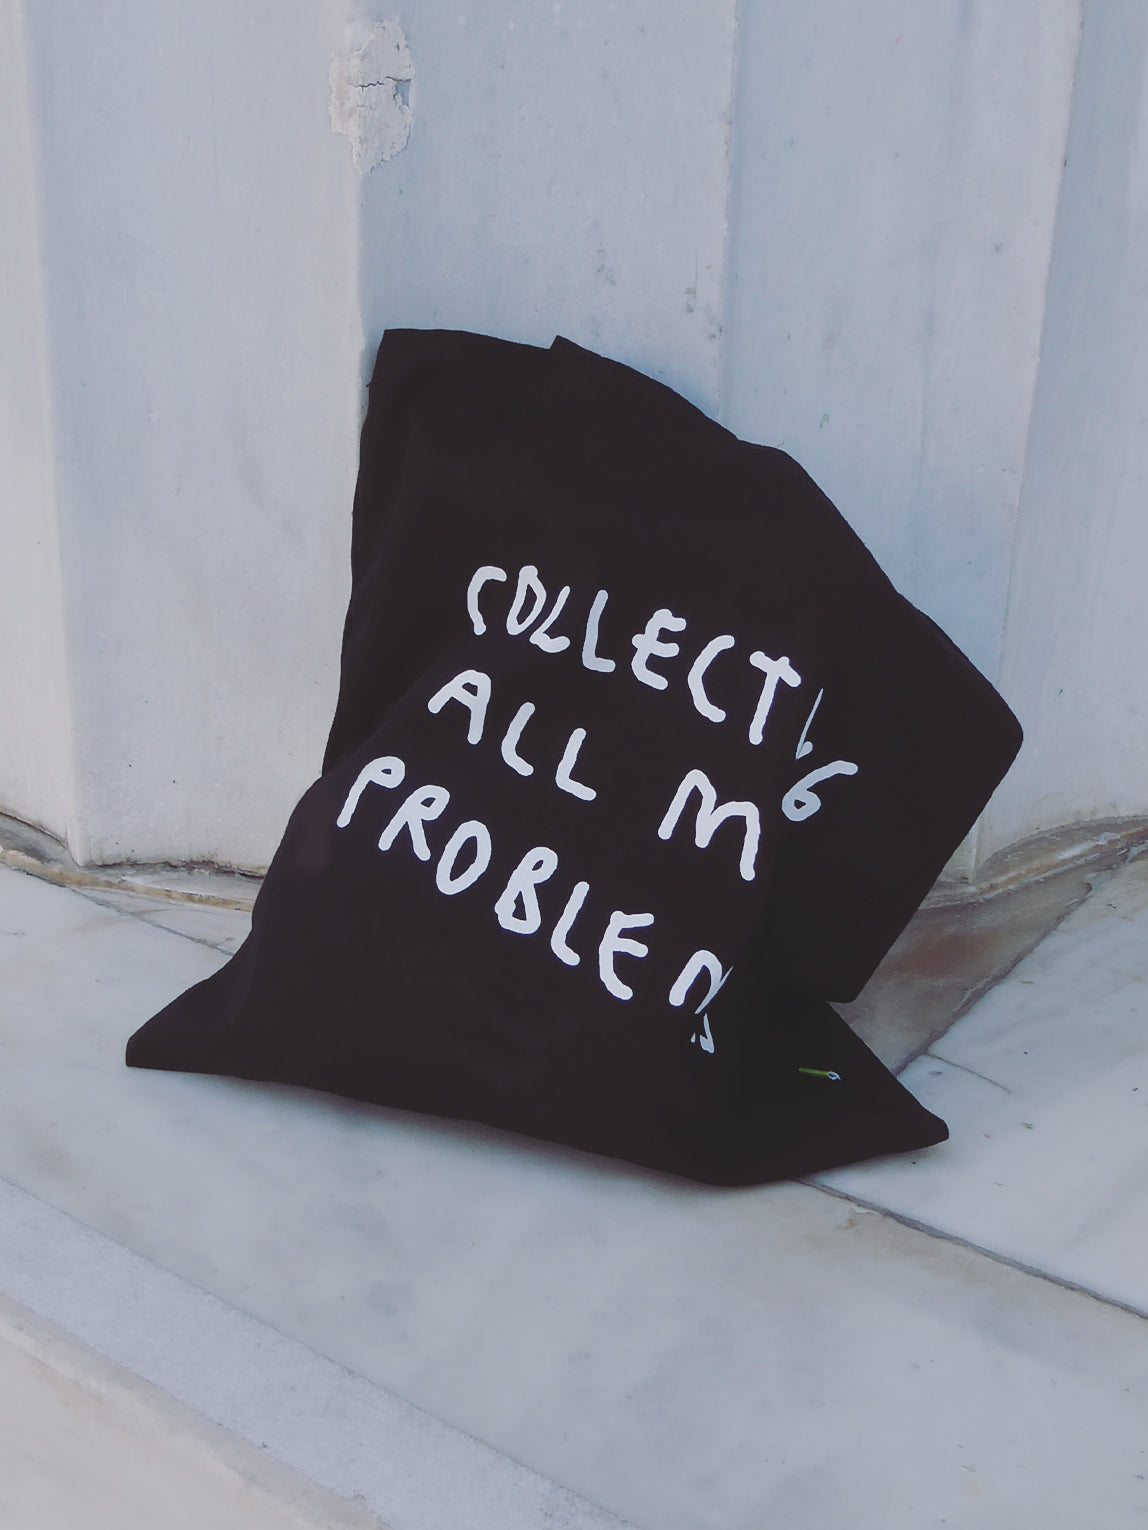 Collecting my problems - black version